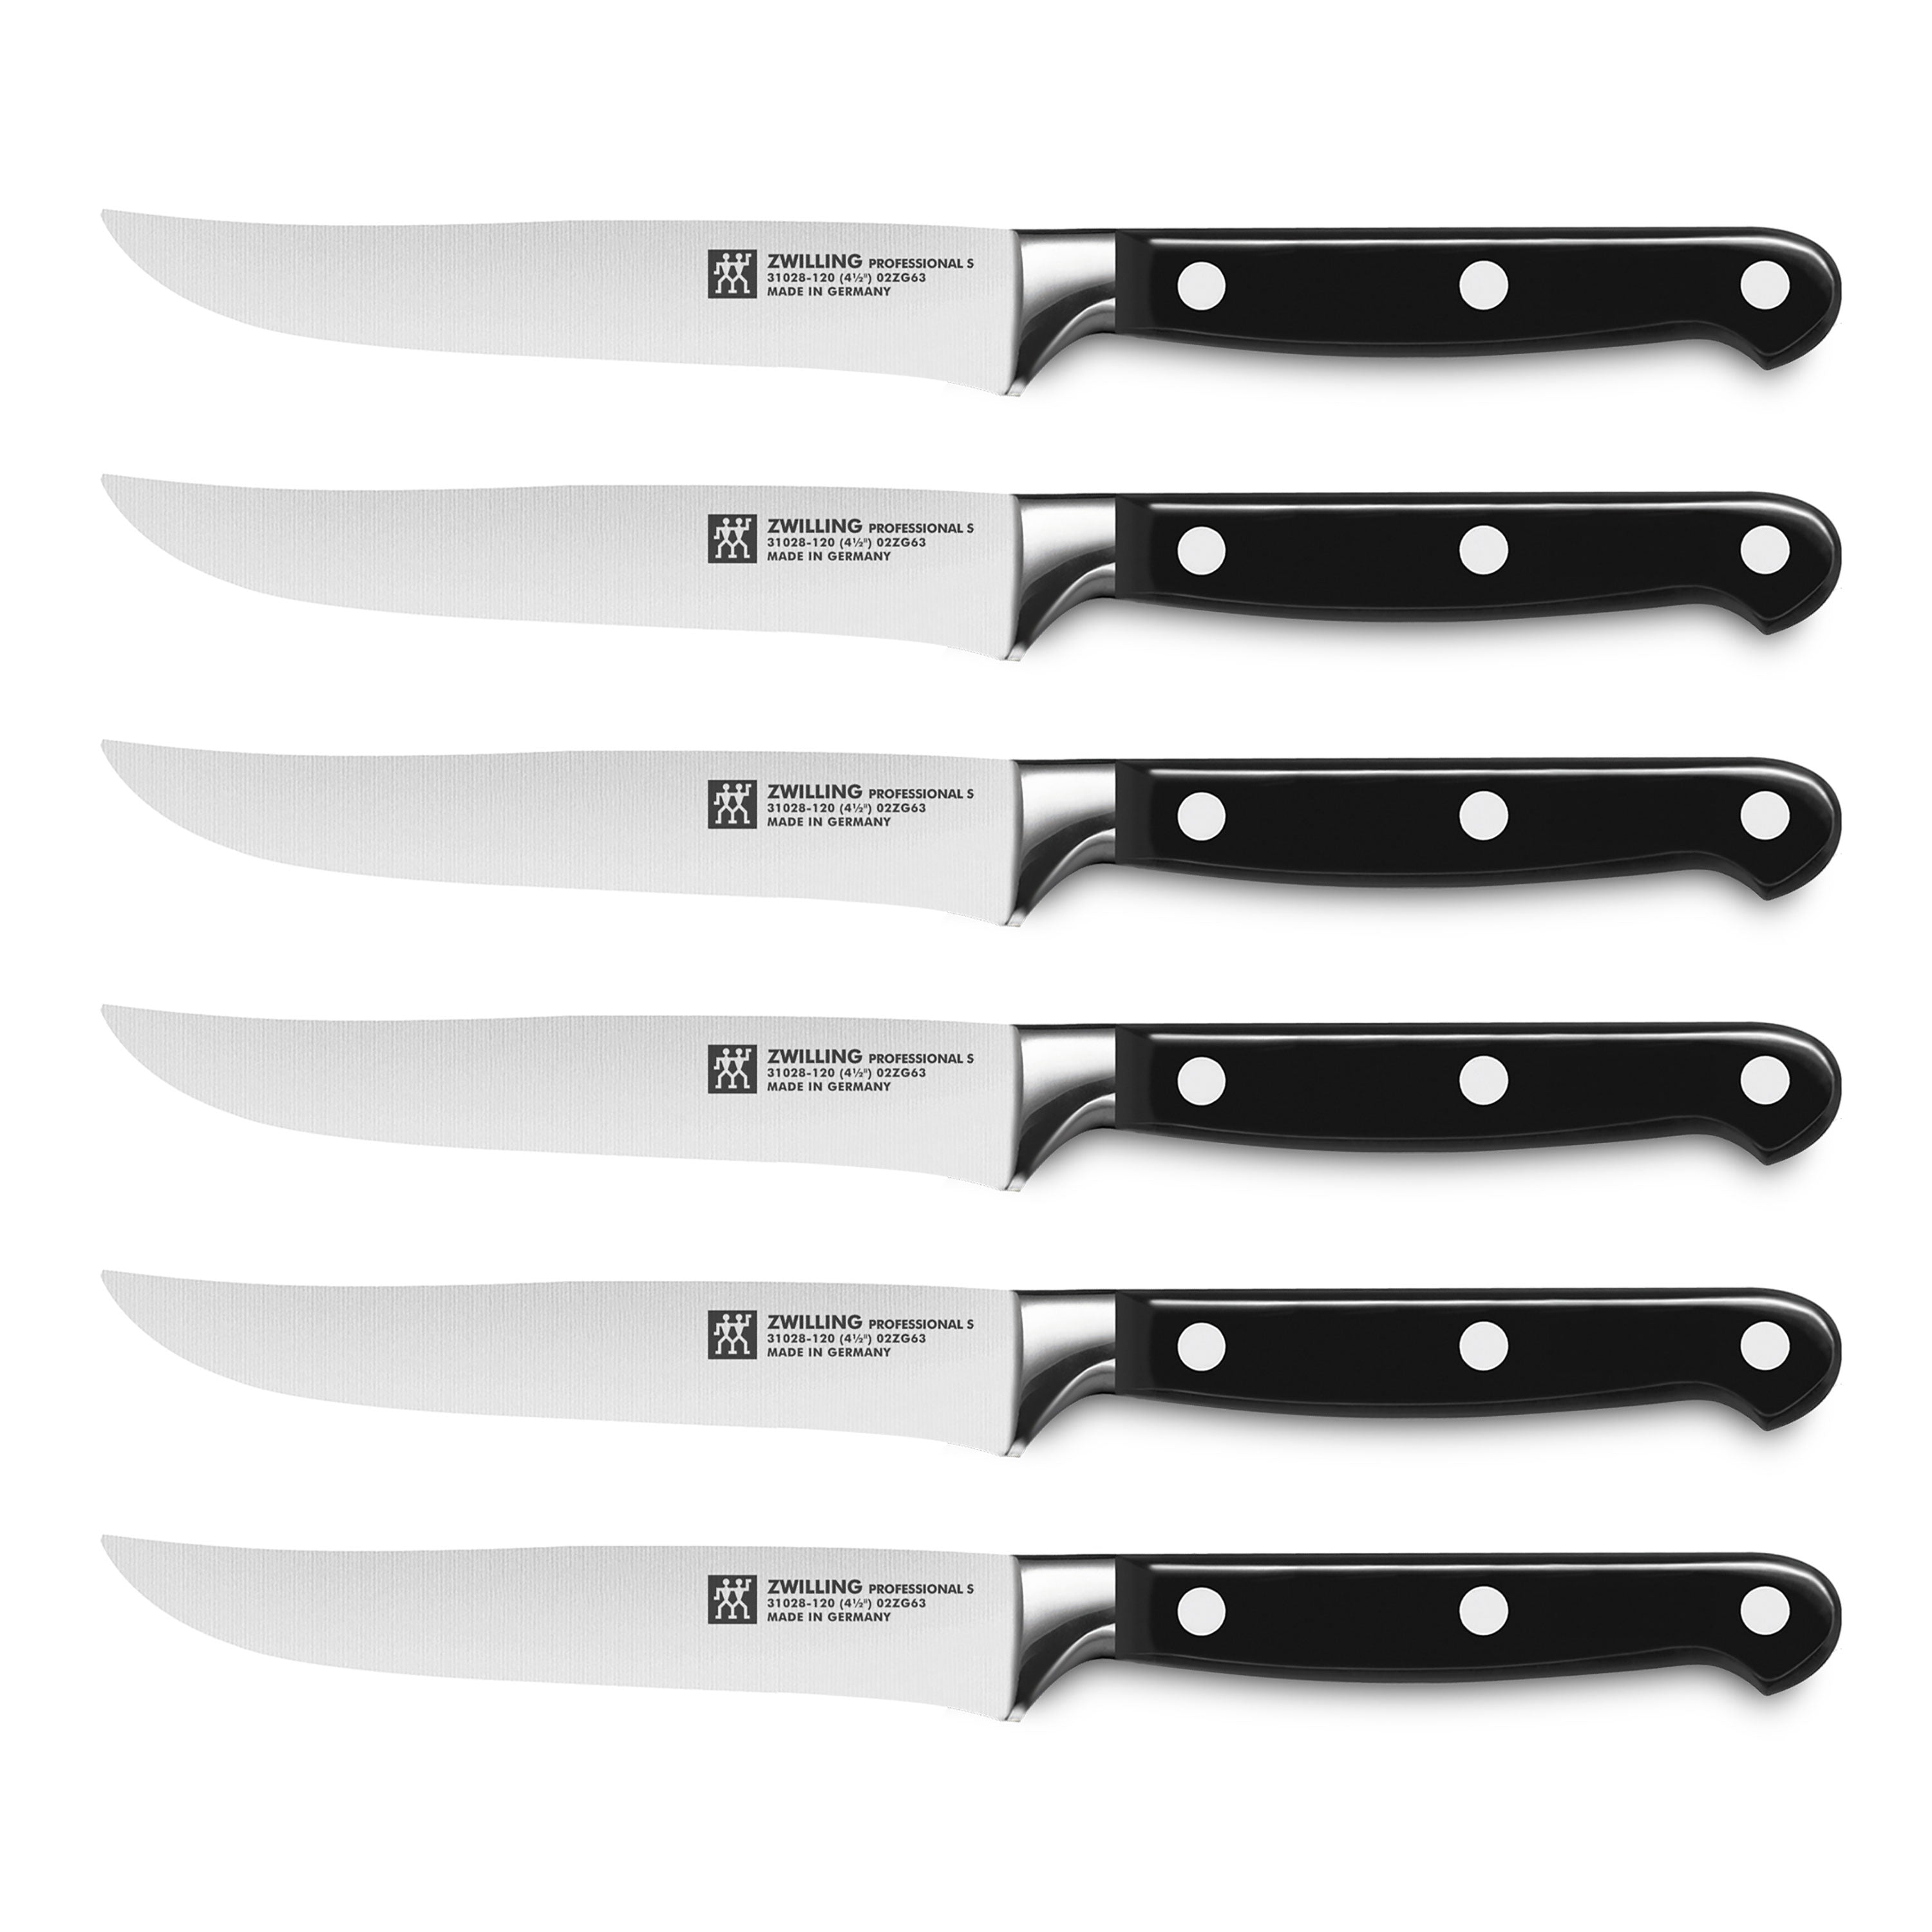 Zwilling Professional S Steak Knives, Set of 4